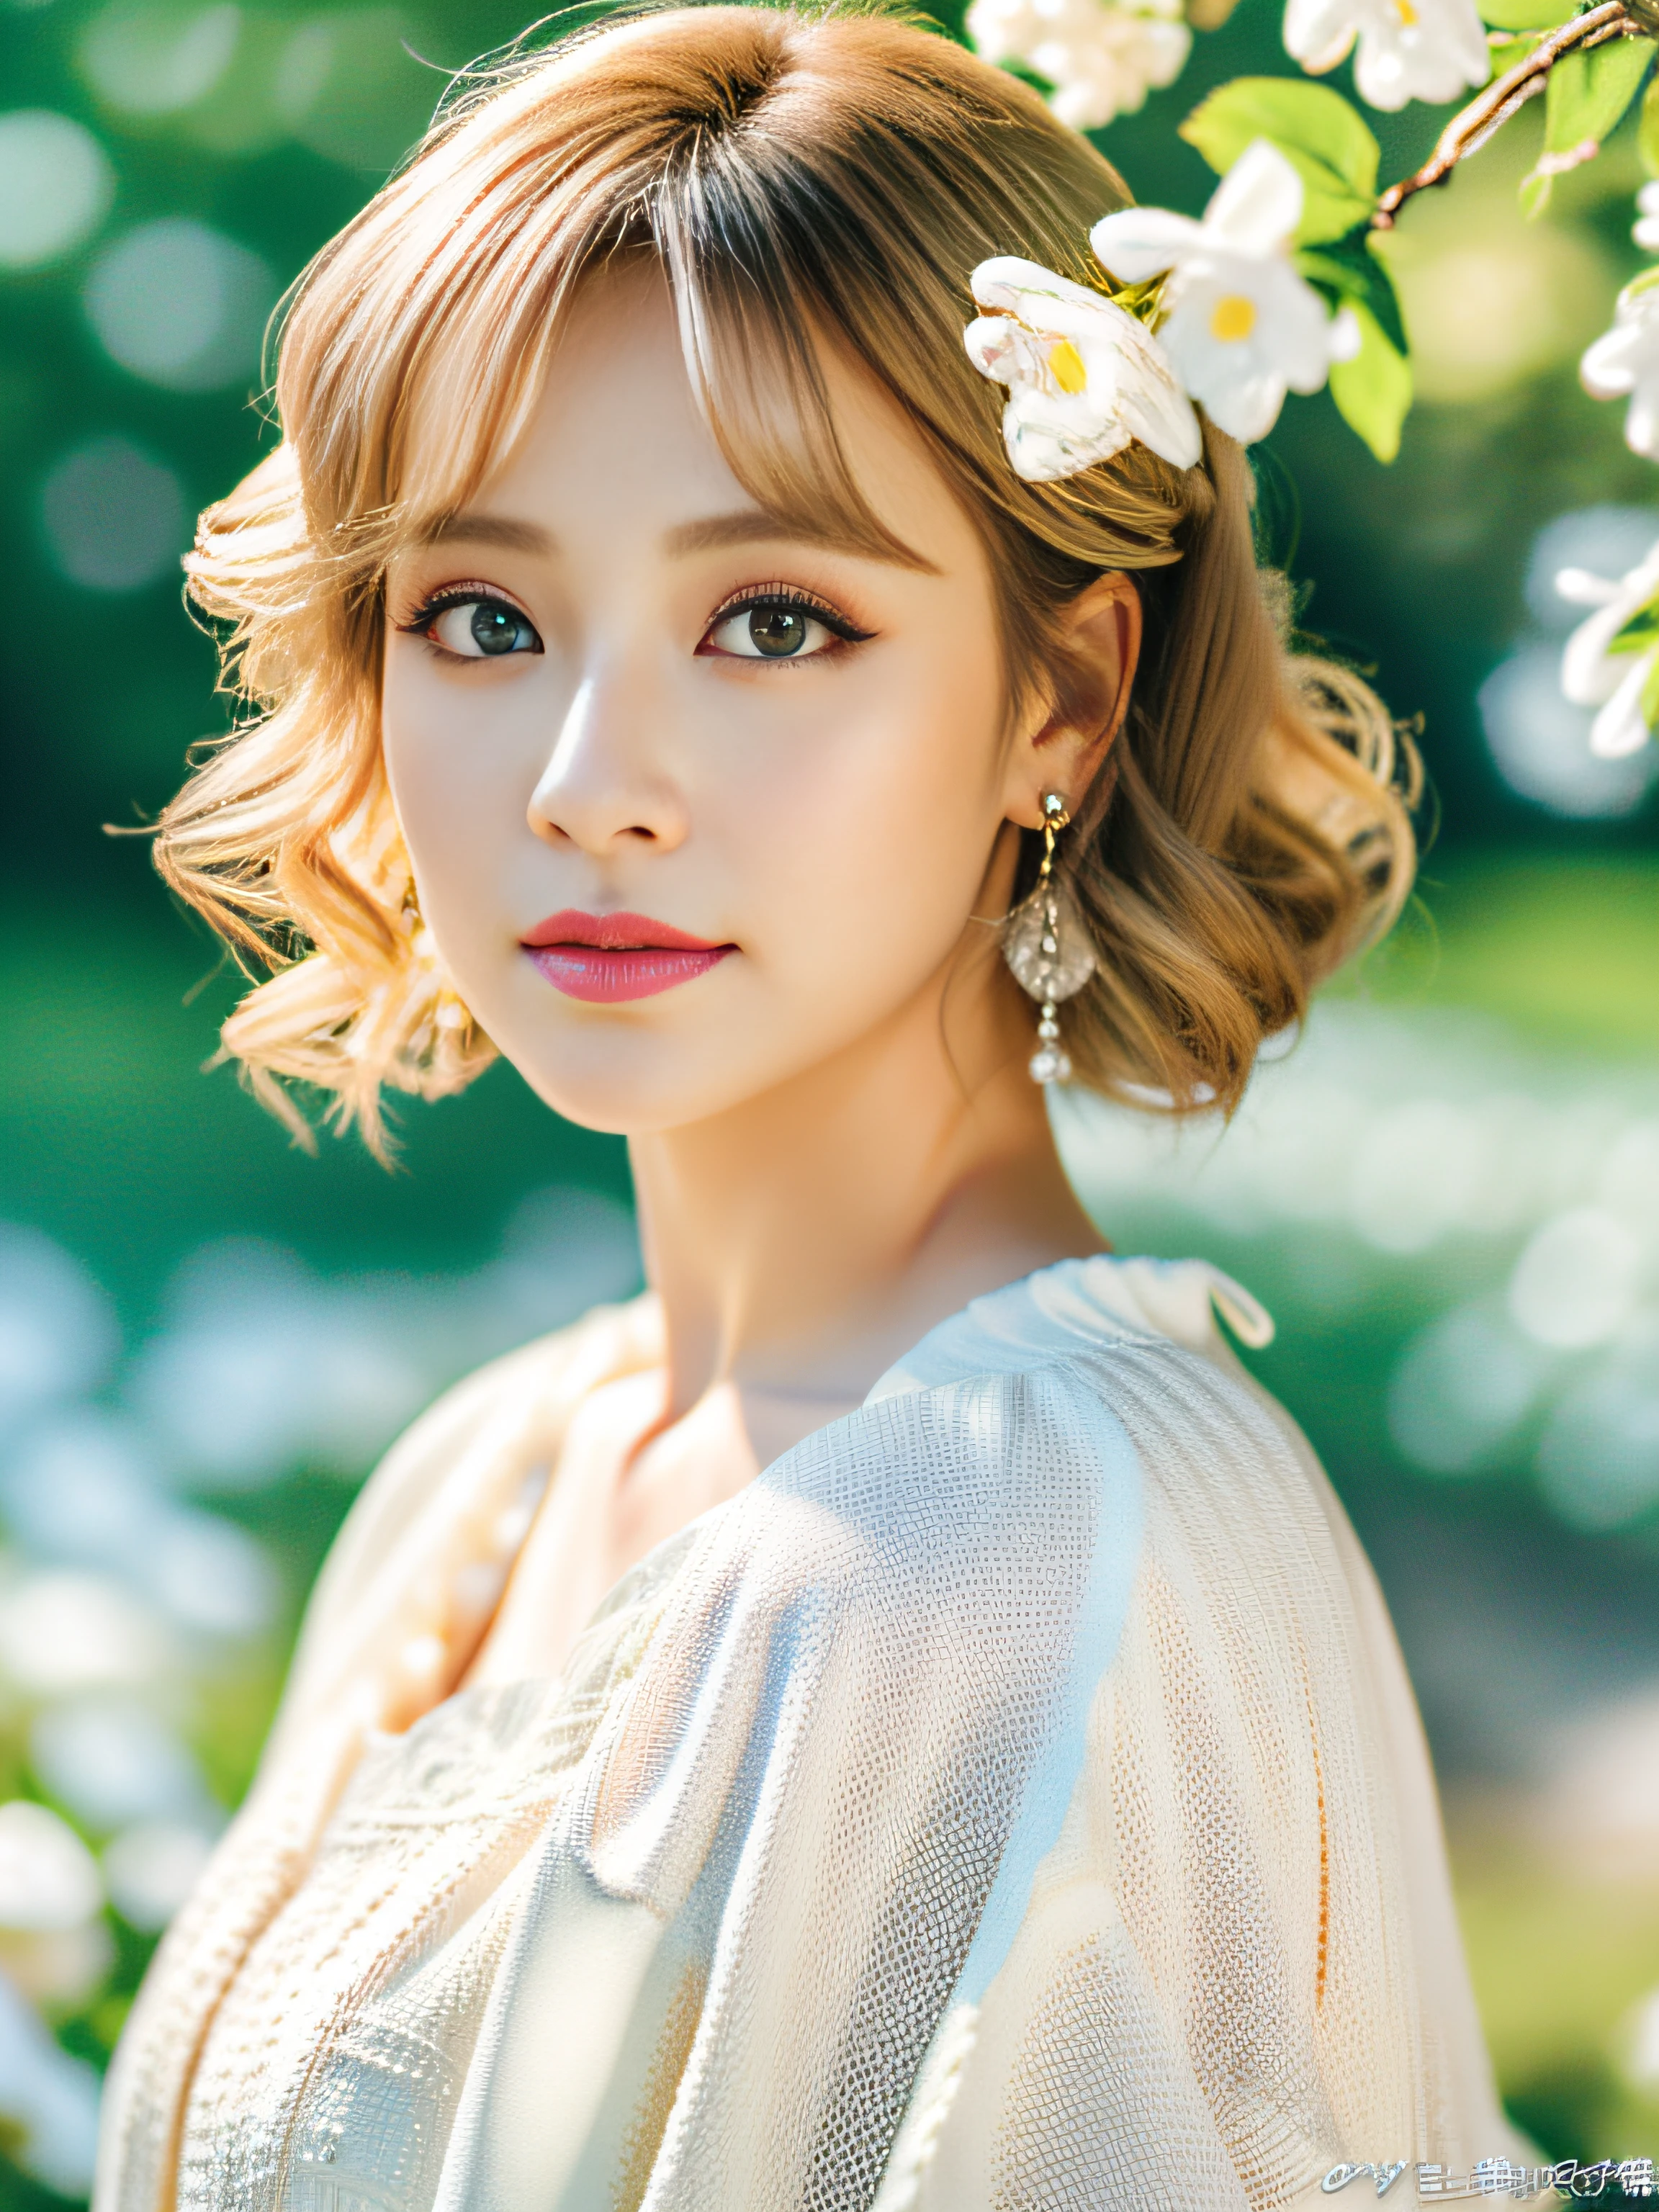 (masutepiece:1.2), (Best Quality:1.2), Perfect eyes, Perfect face, Perfect Lighting, 1girl in, Mature woman in the field, medium blonde hair, Curly hair, detailed  clothes, White dress、Detailed outdoor background, makeup, eyeshadows, thick eyelashes, Fantasy, Looking at the viewer, spring